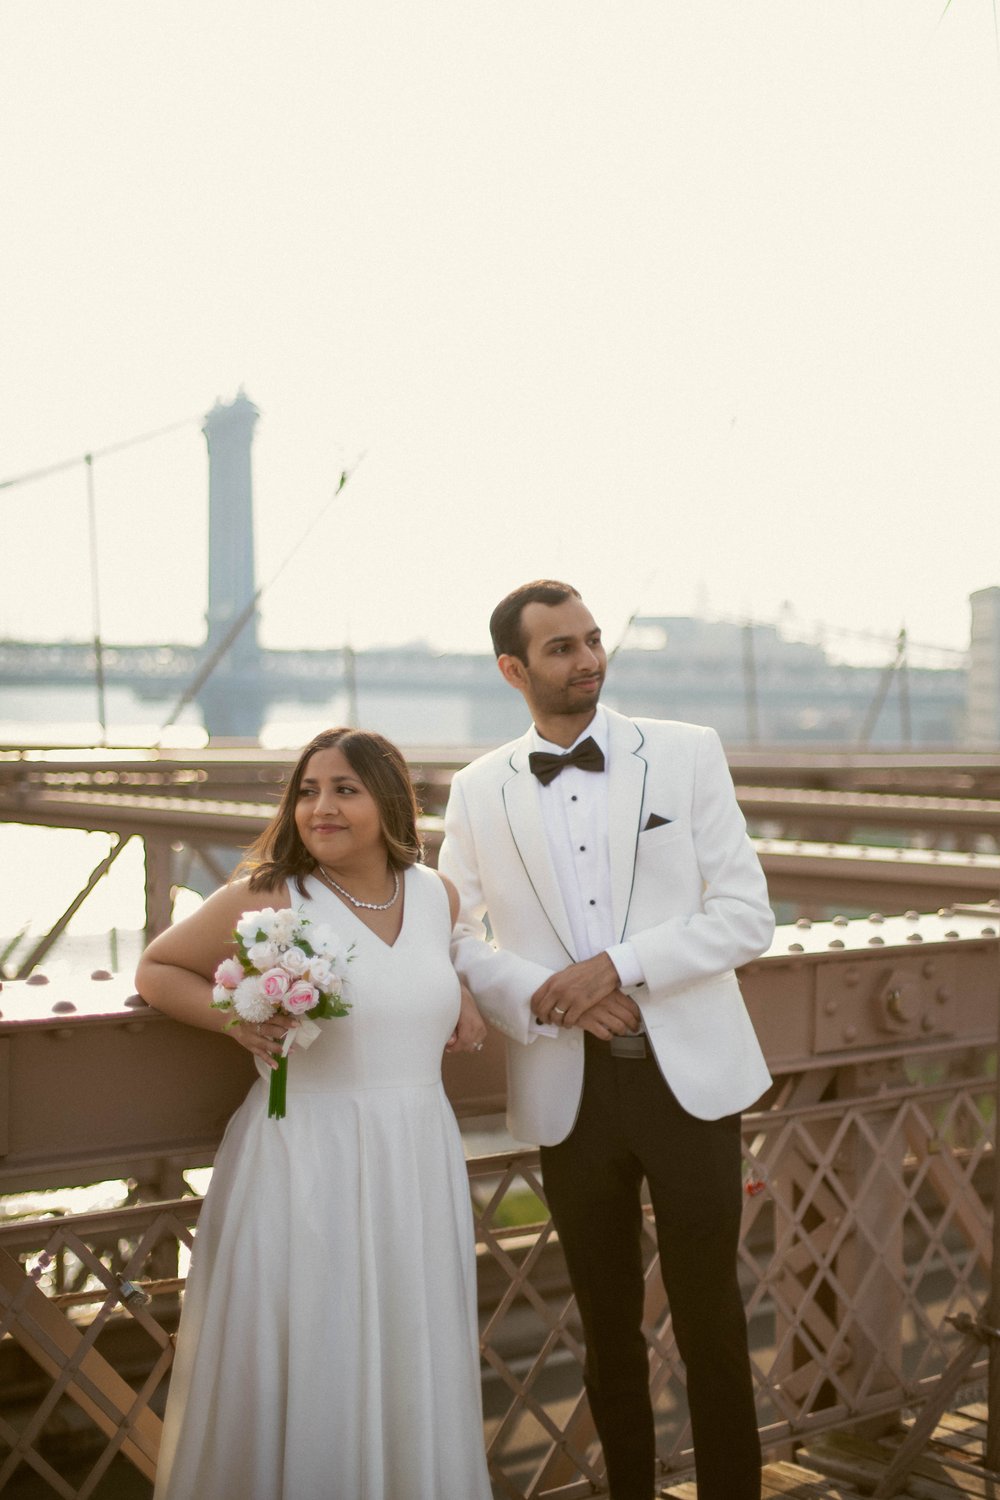 Celebrate love and togetherness with Misha and Sahil's intimate #NYCElopement, surrounded by the serenity of the #BrooklynBridge at dawn.